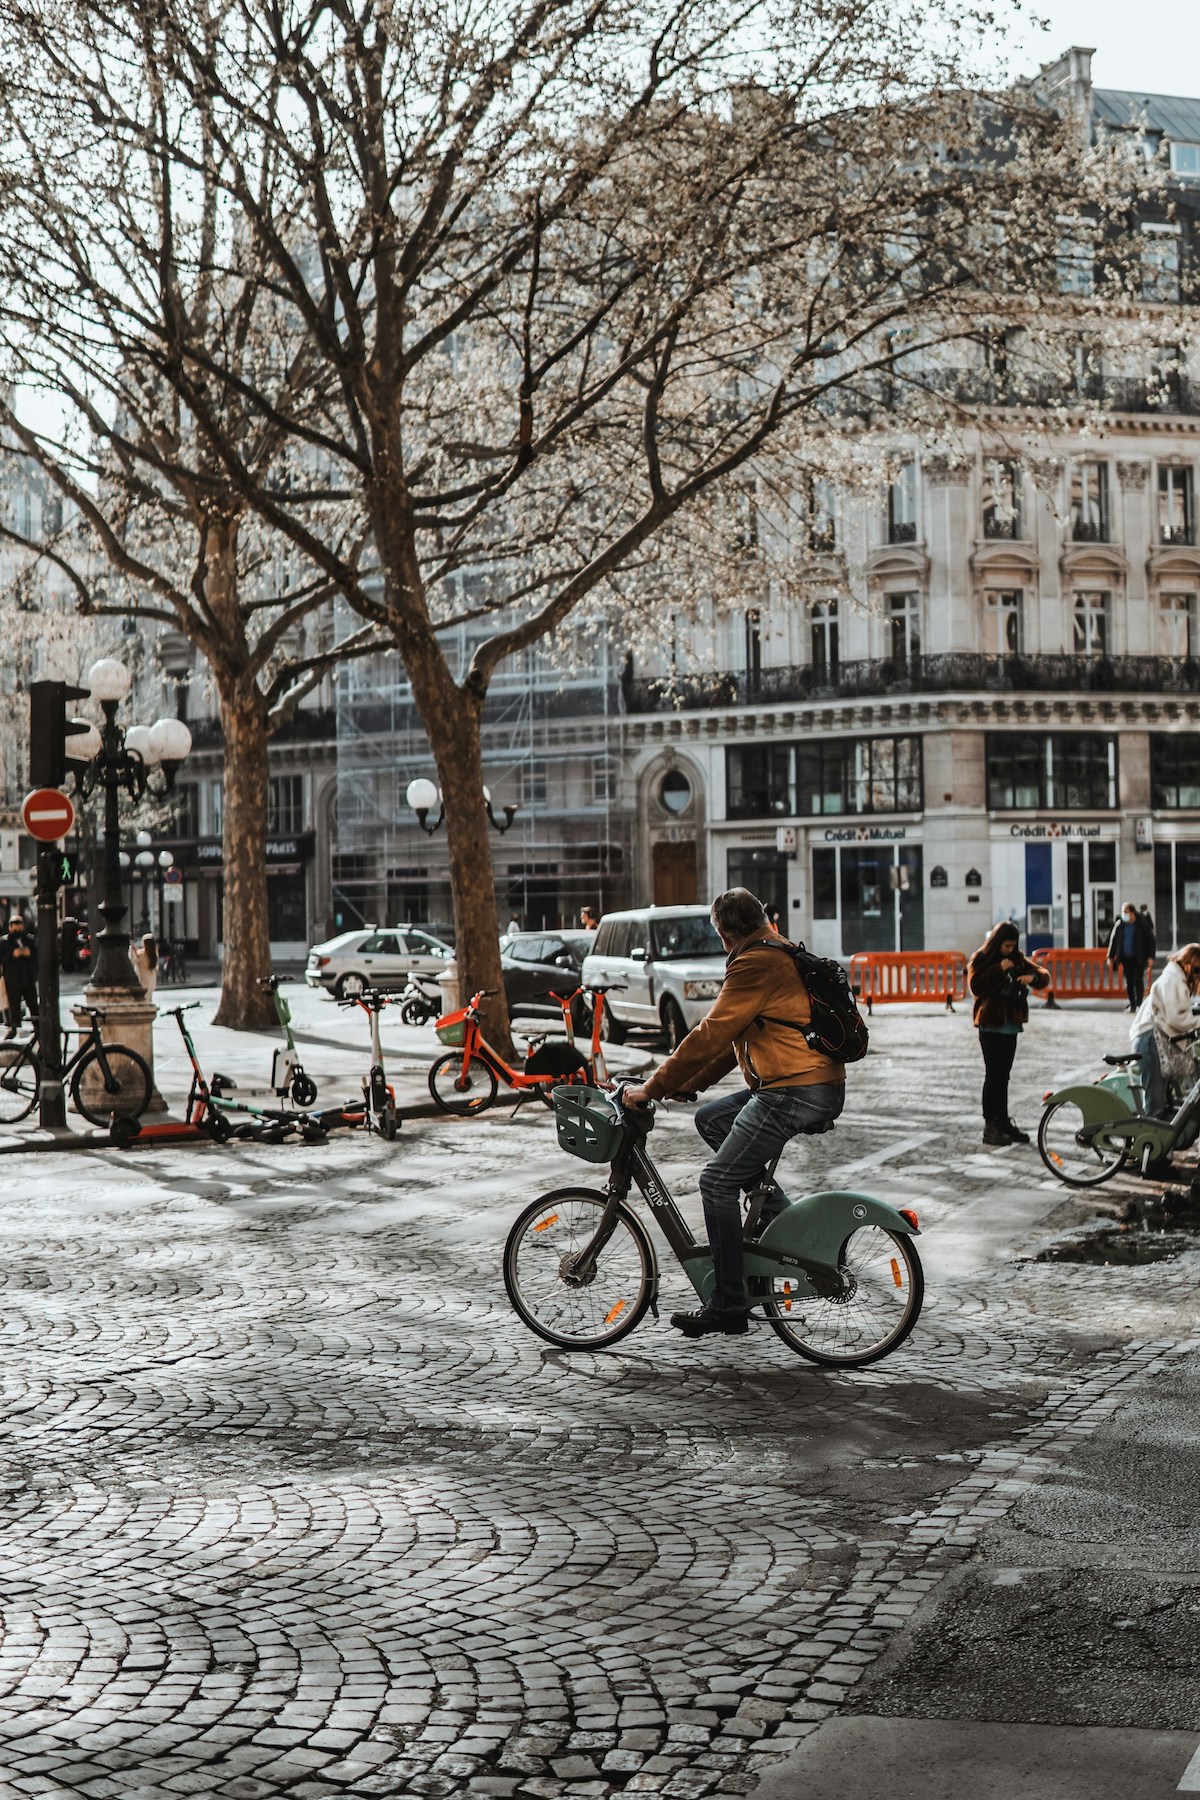 Many options for renting bikes in Paris in an image